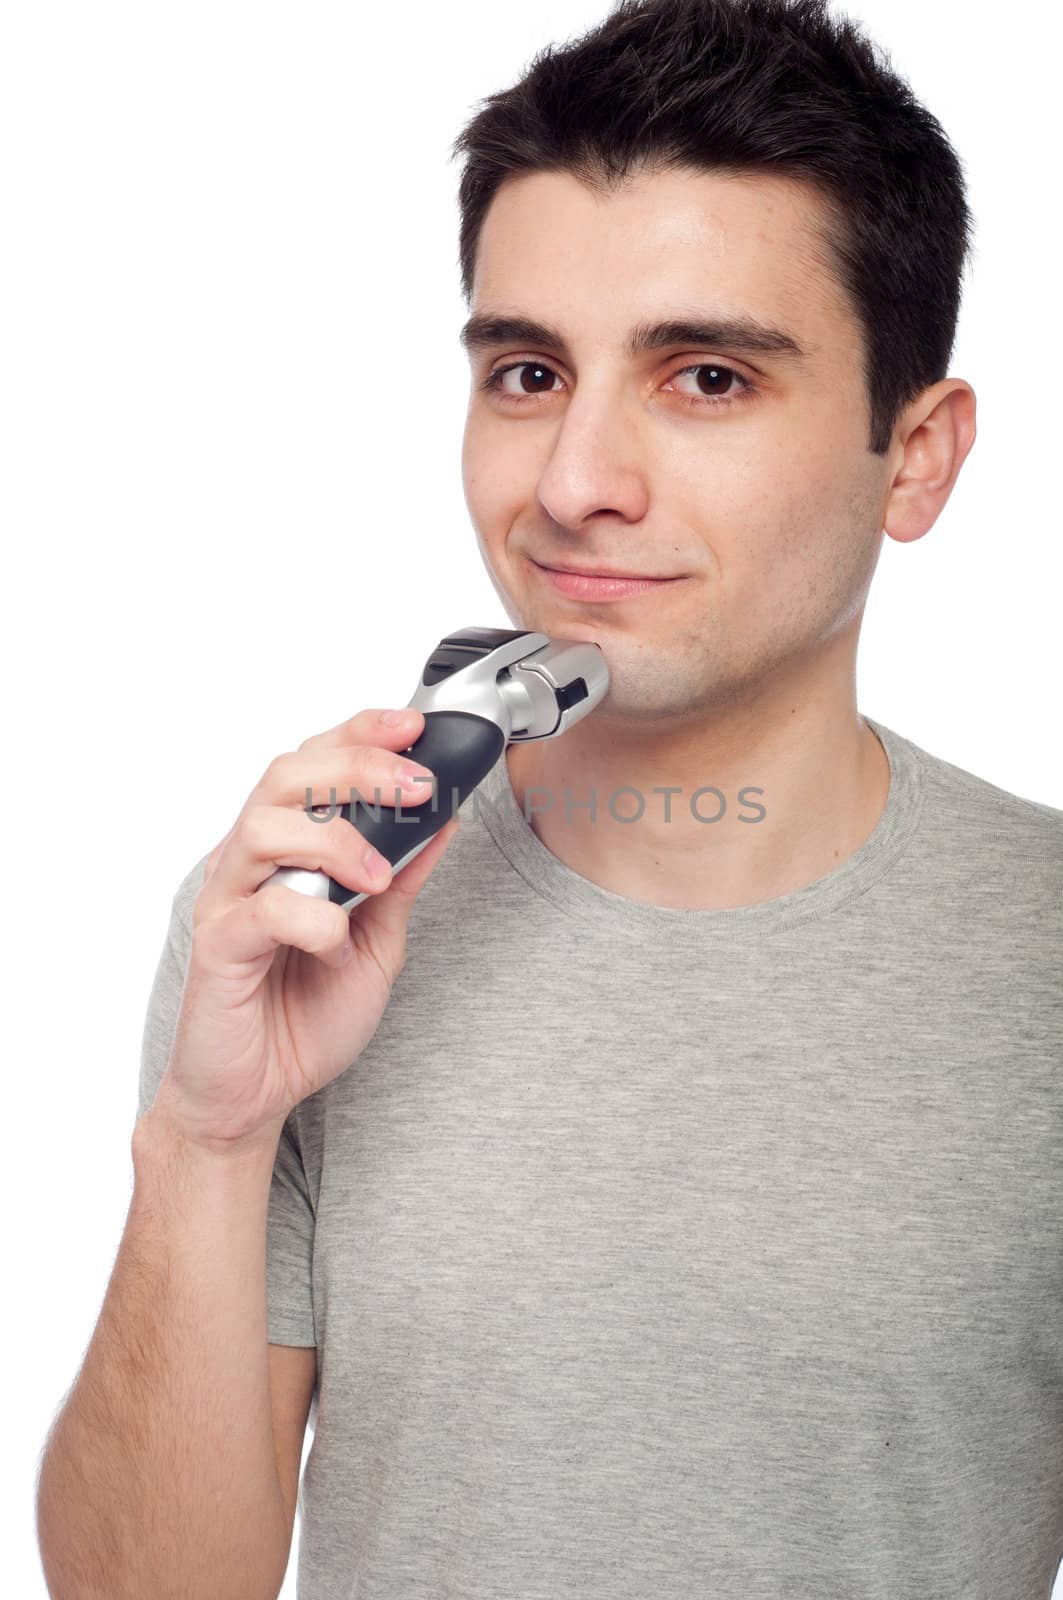 handsome young man shaving with electric shaver (isolated on white background)